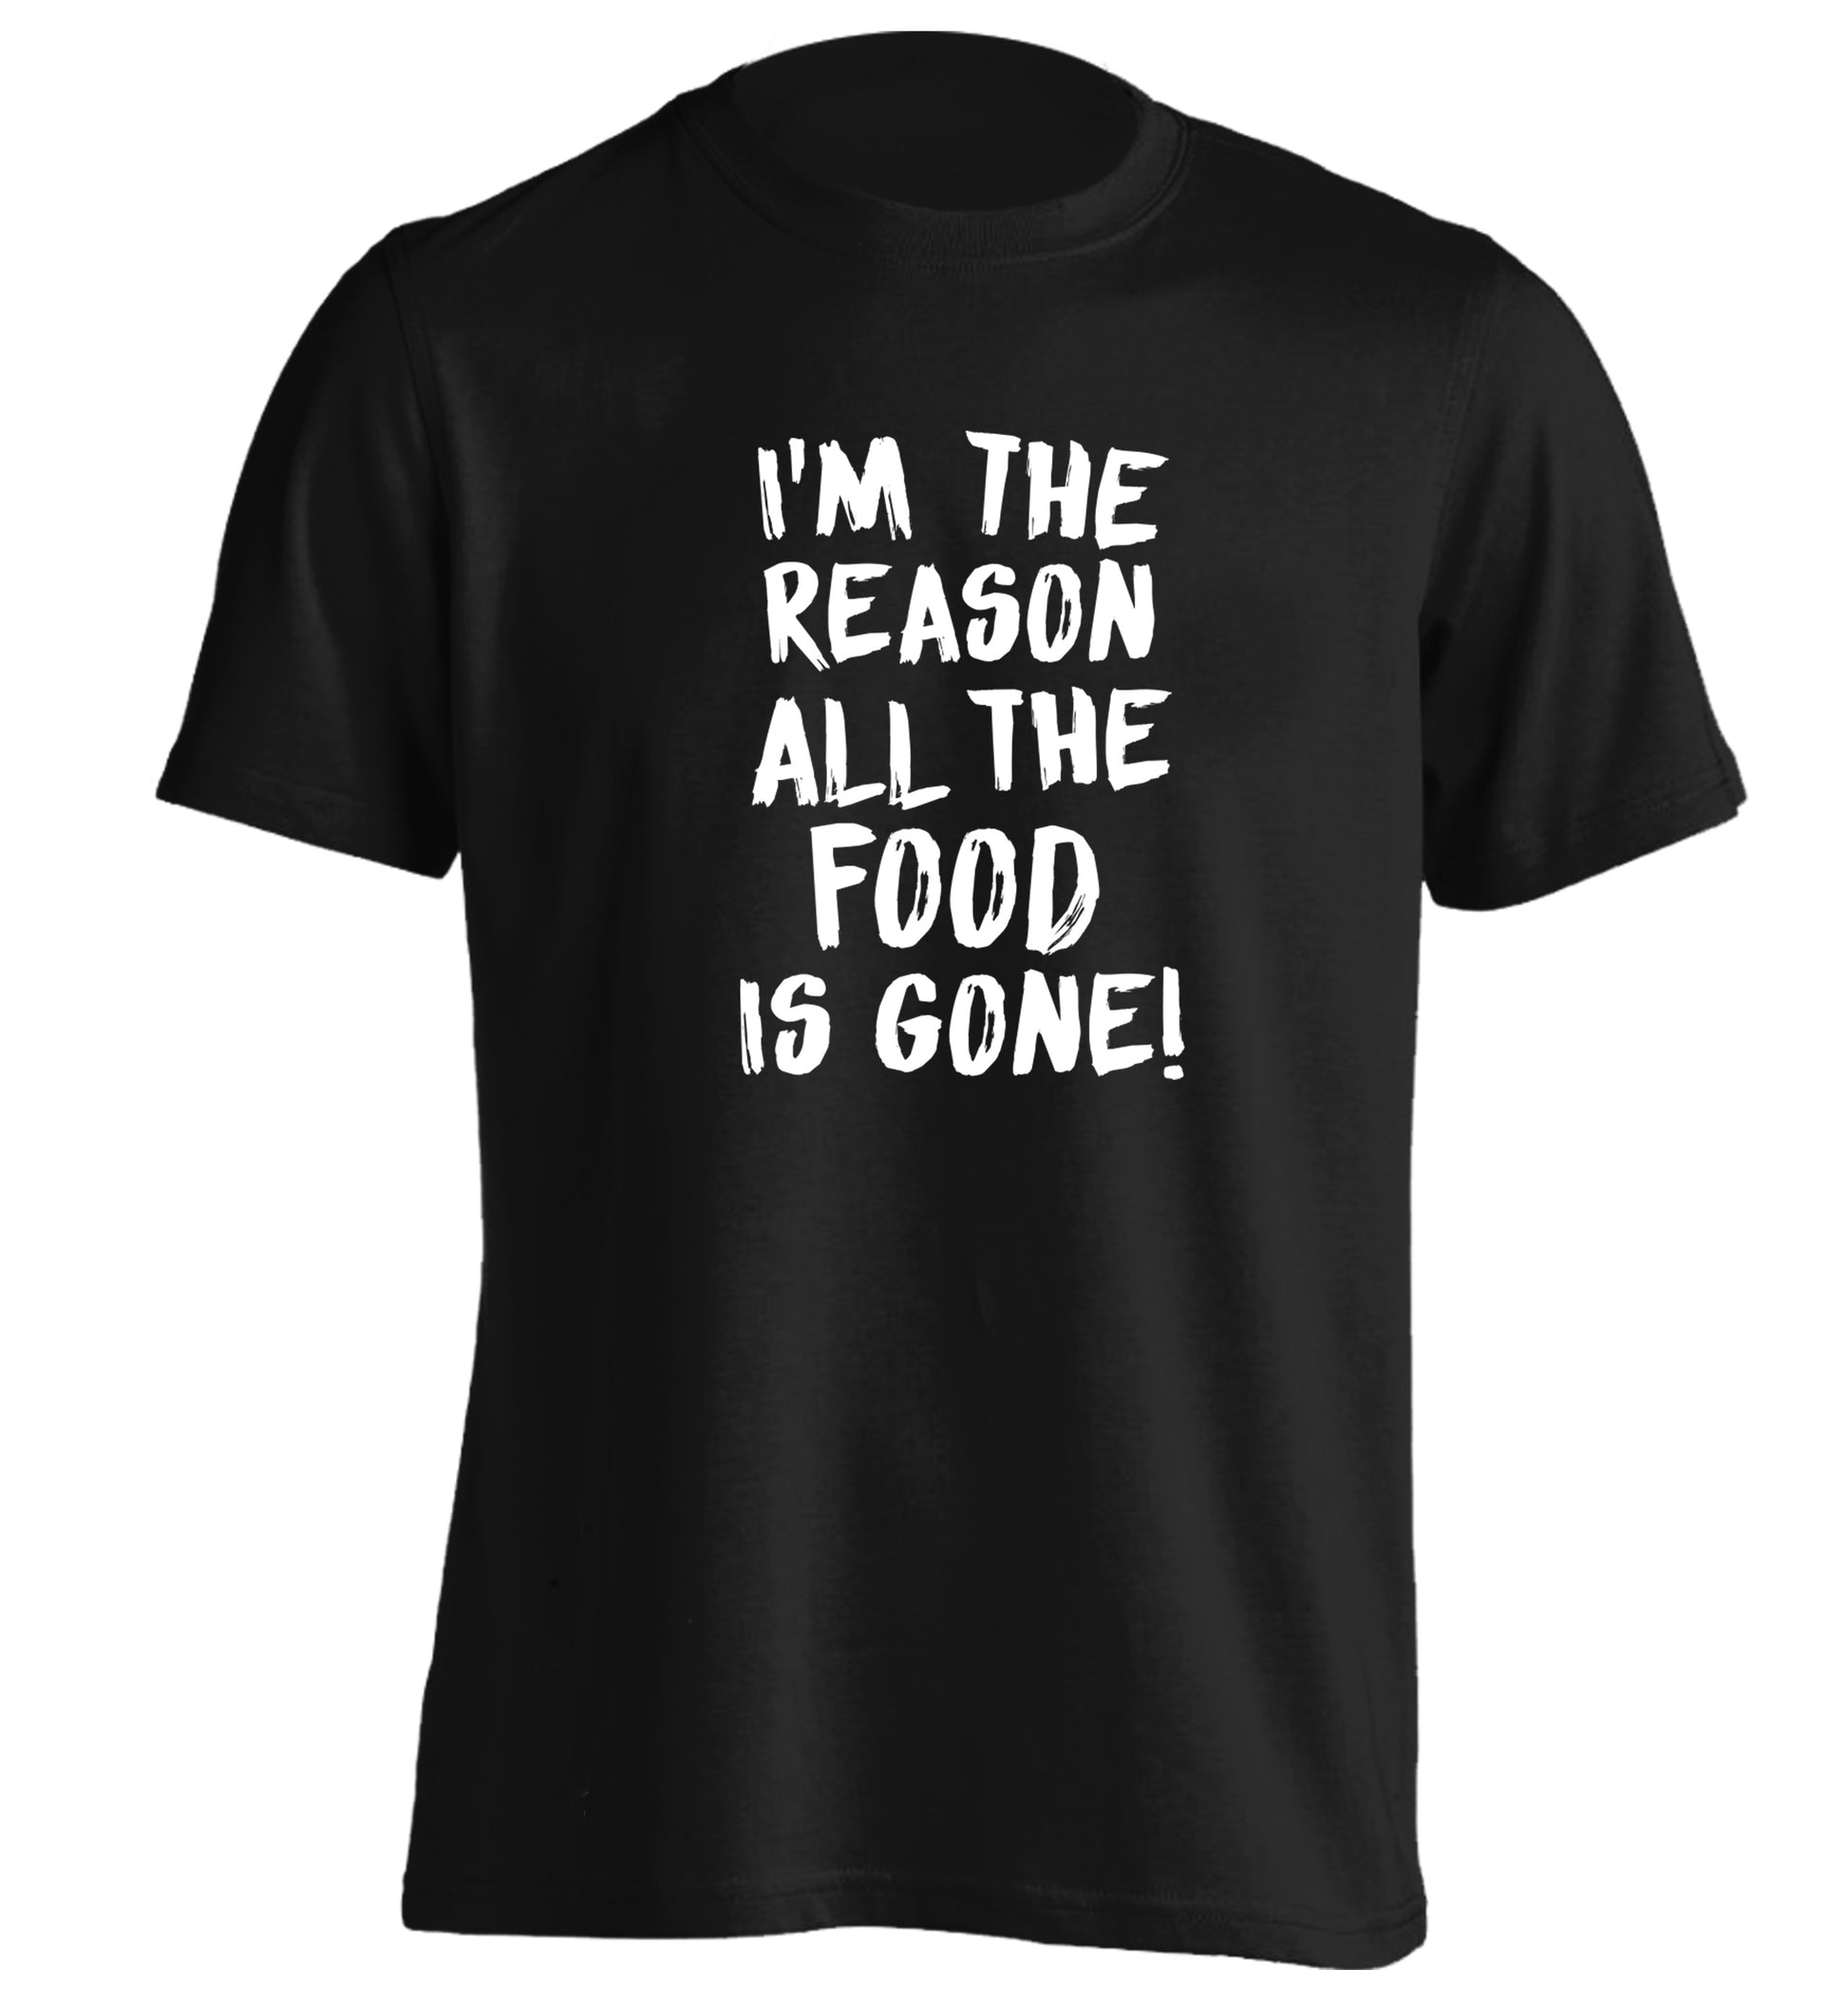 I'm the reason why all the food is gone adults unisex black Tshirt 2XL